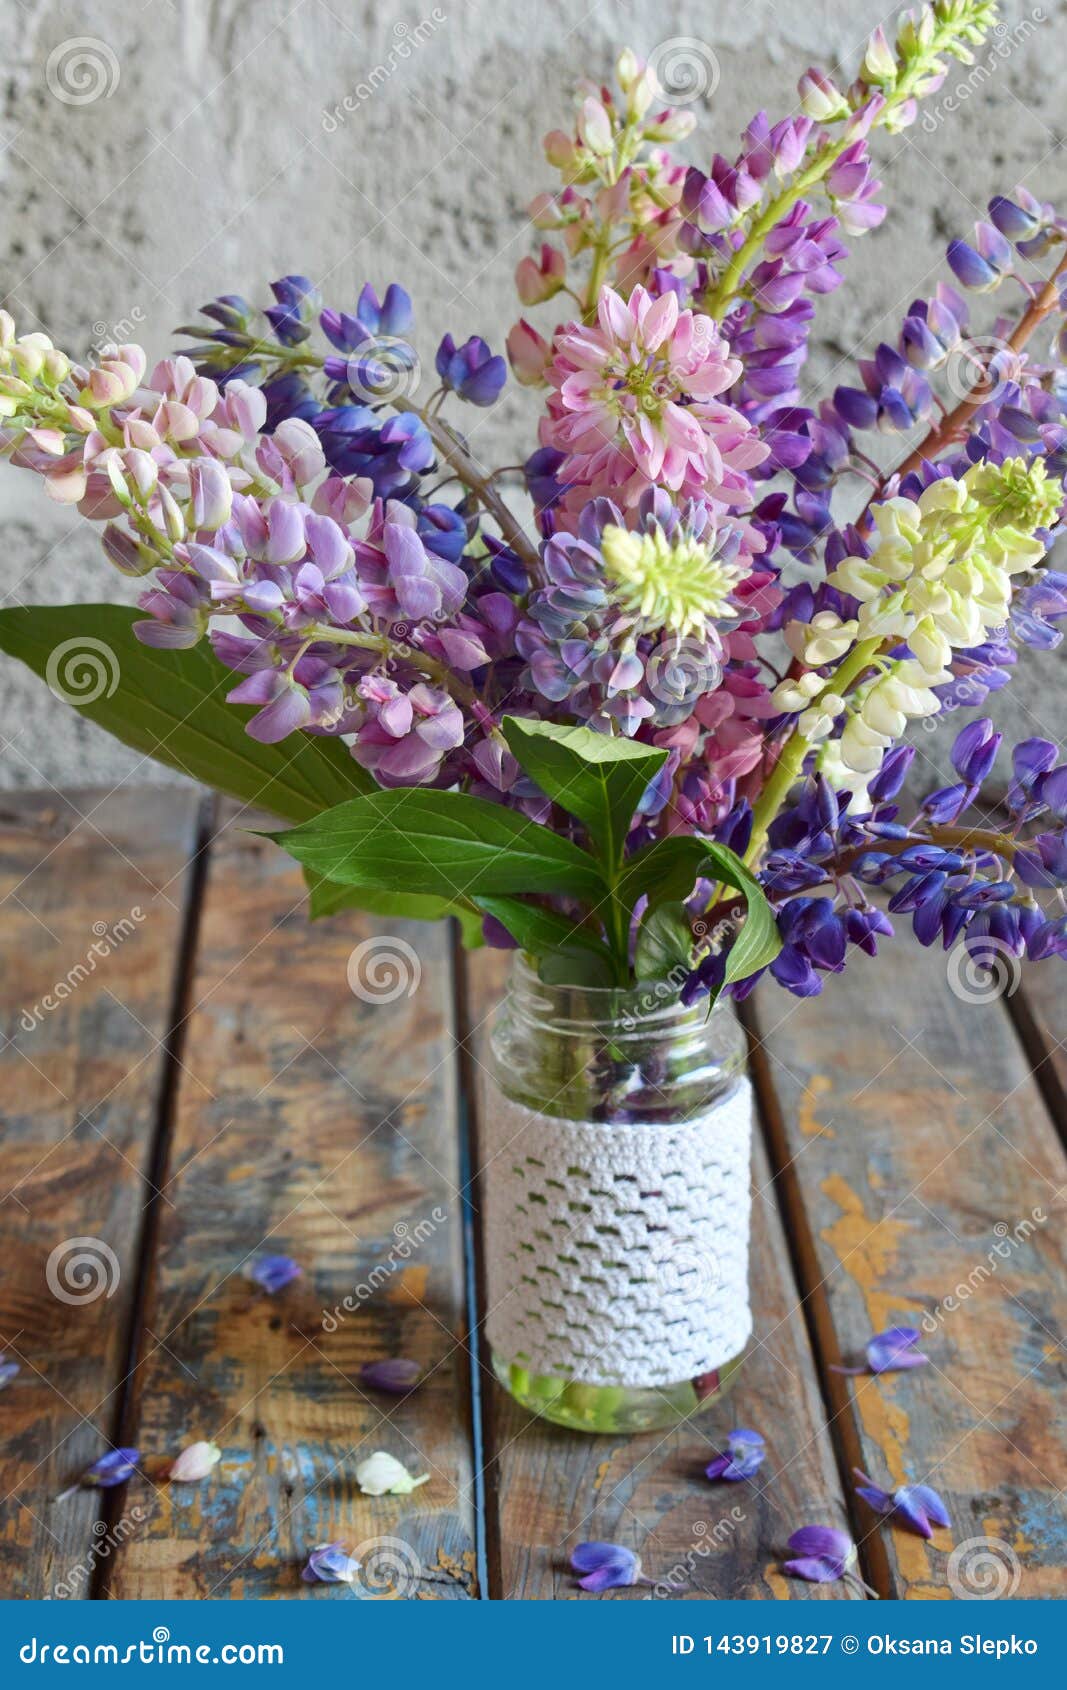 Pink Purple Lupine Flowers Bouquet In Vase Birthday Mother S Day Valentine S Day March 8 Wedding Card Or Invitation Festi Stock Image Image Of Bloom Blue 143919827